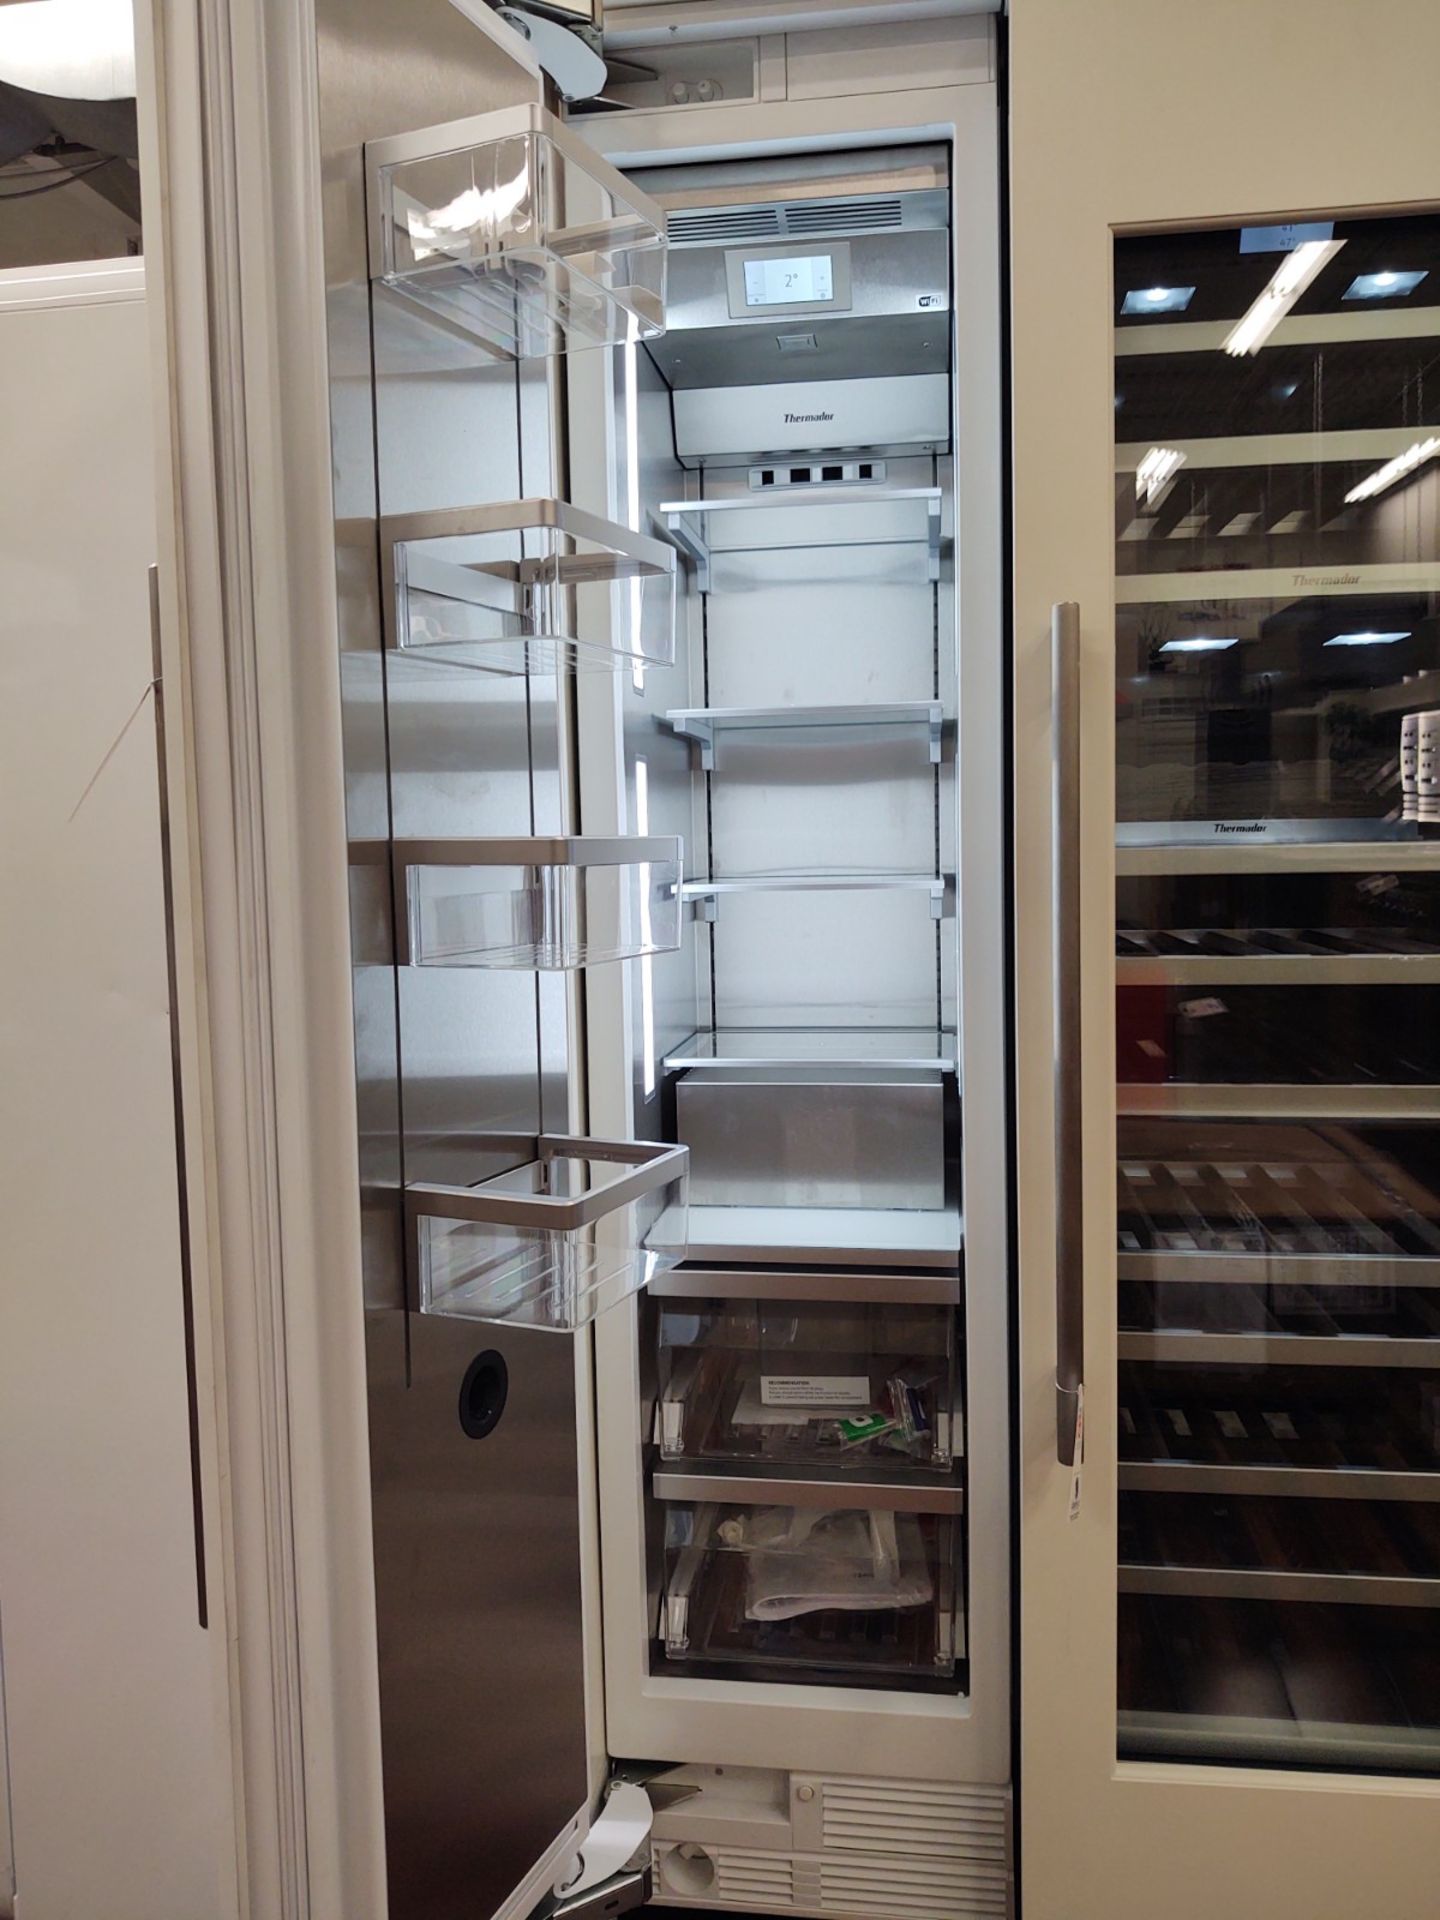 Thermador 18" Single Door Freezer w/ White Panel Front, 84" Height, #T18F9052P/09 - Image 2 of 2